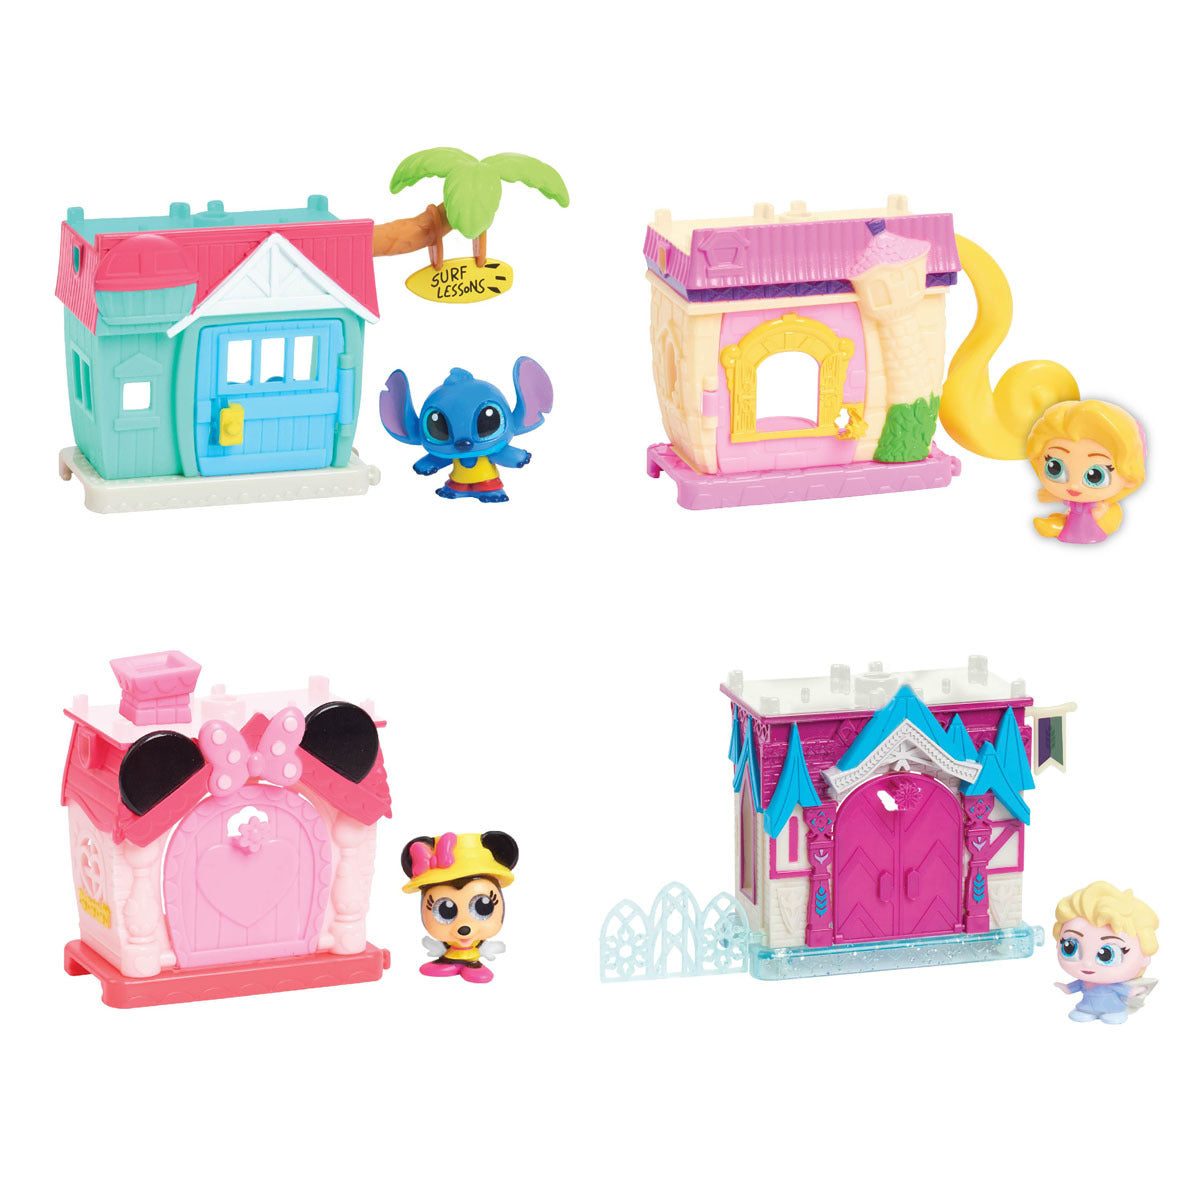 Disney Doorables Mini Playset (Styles Vary - One Supplied)